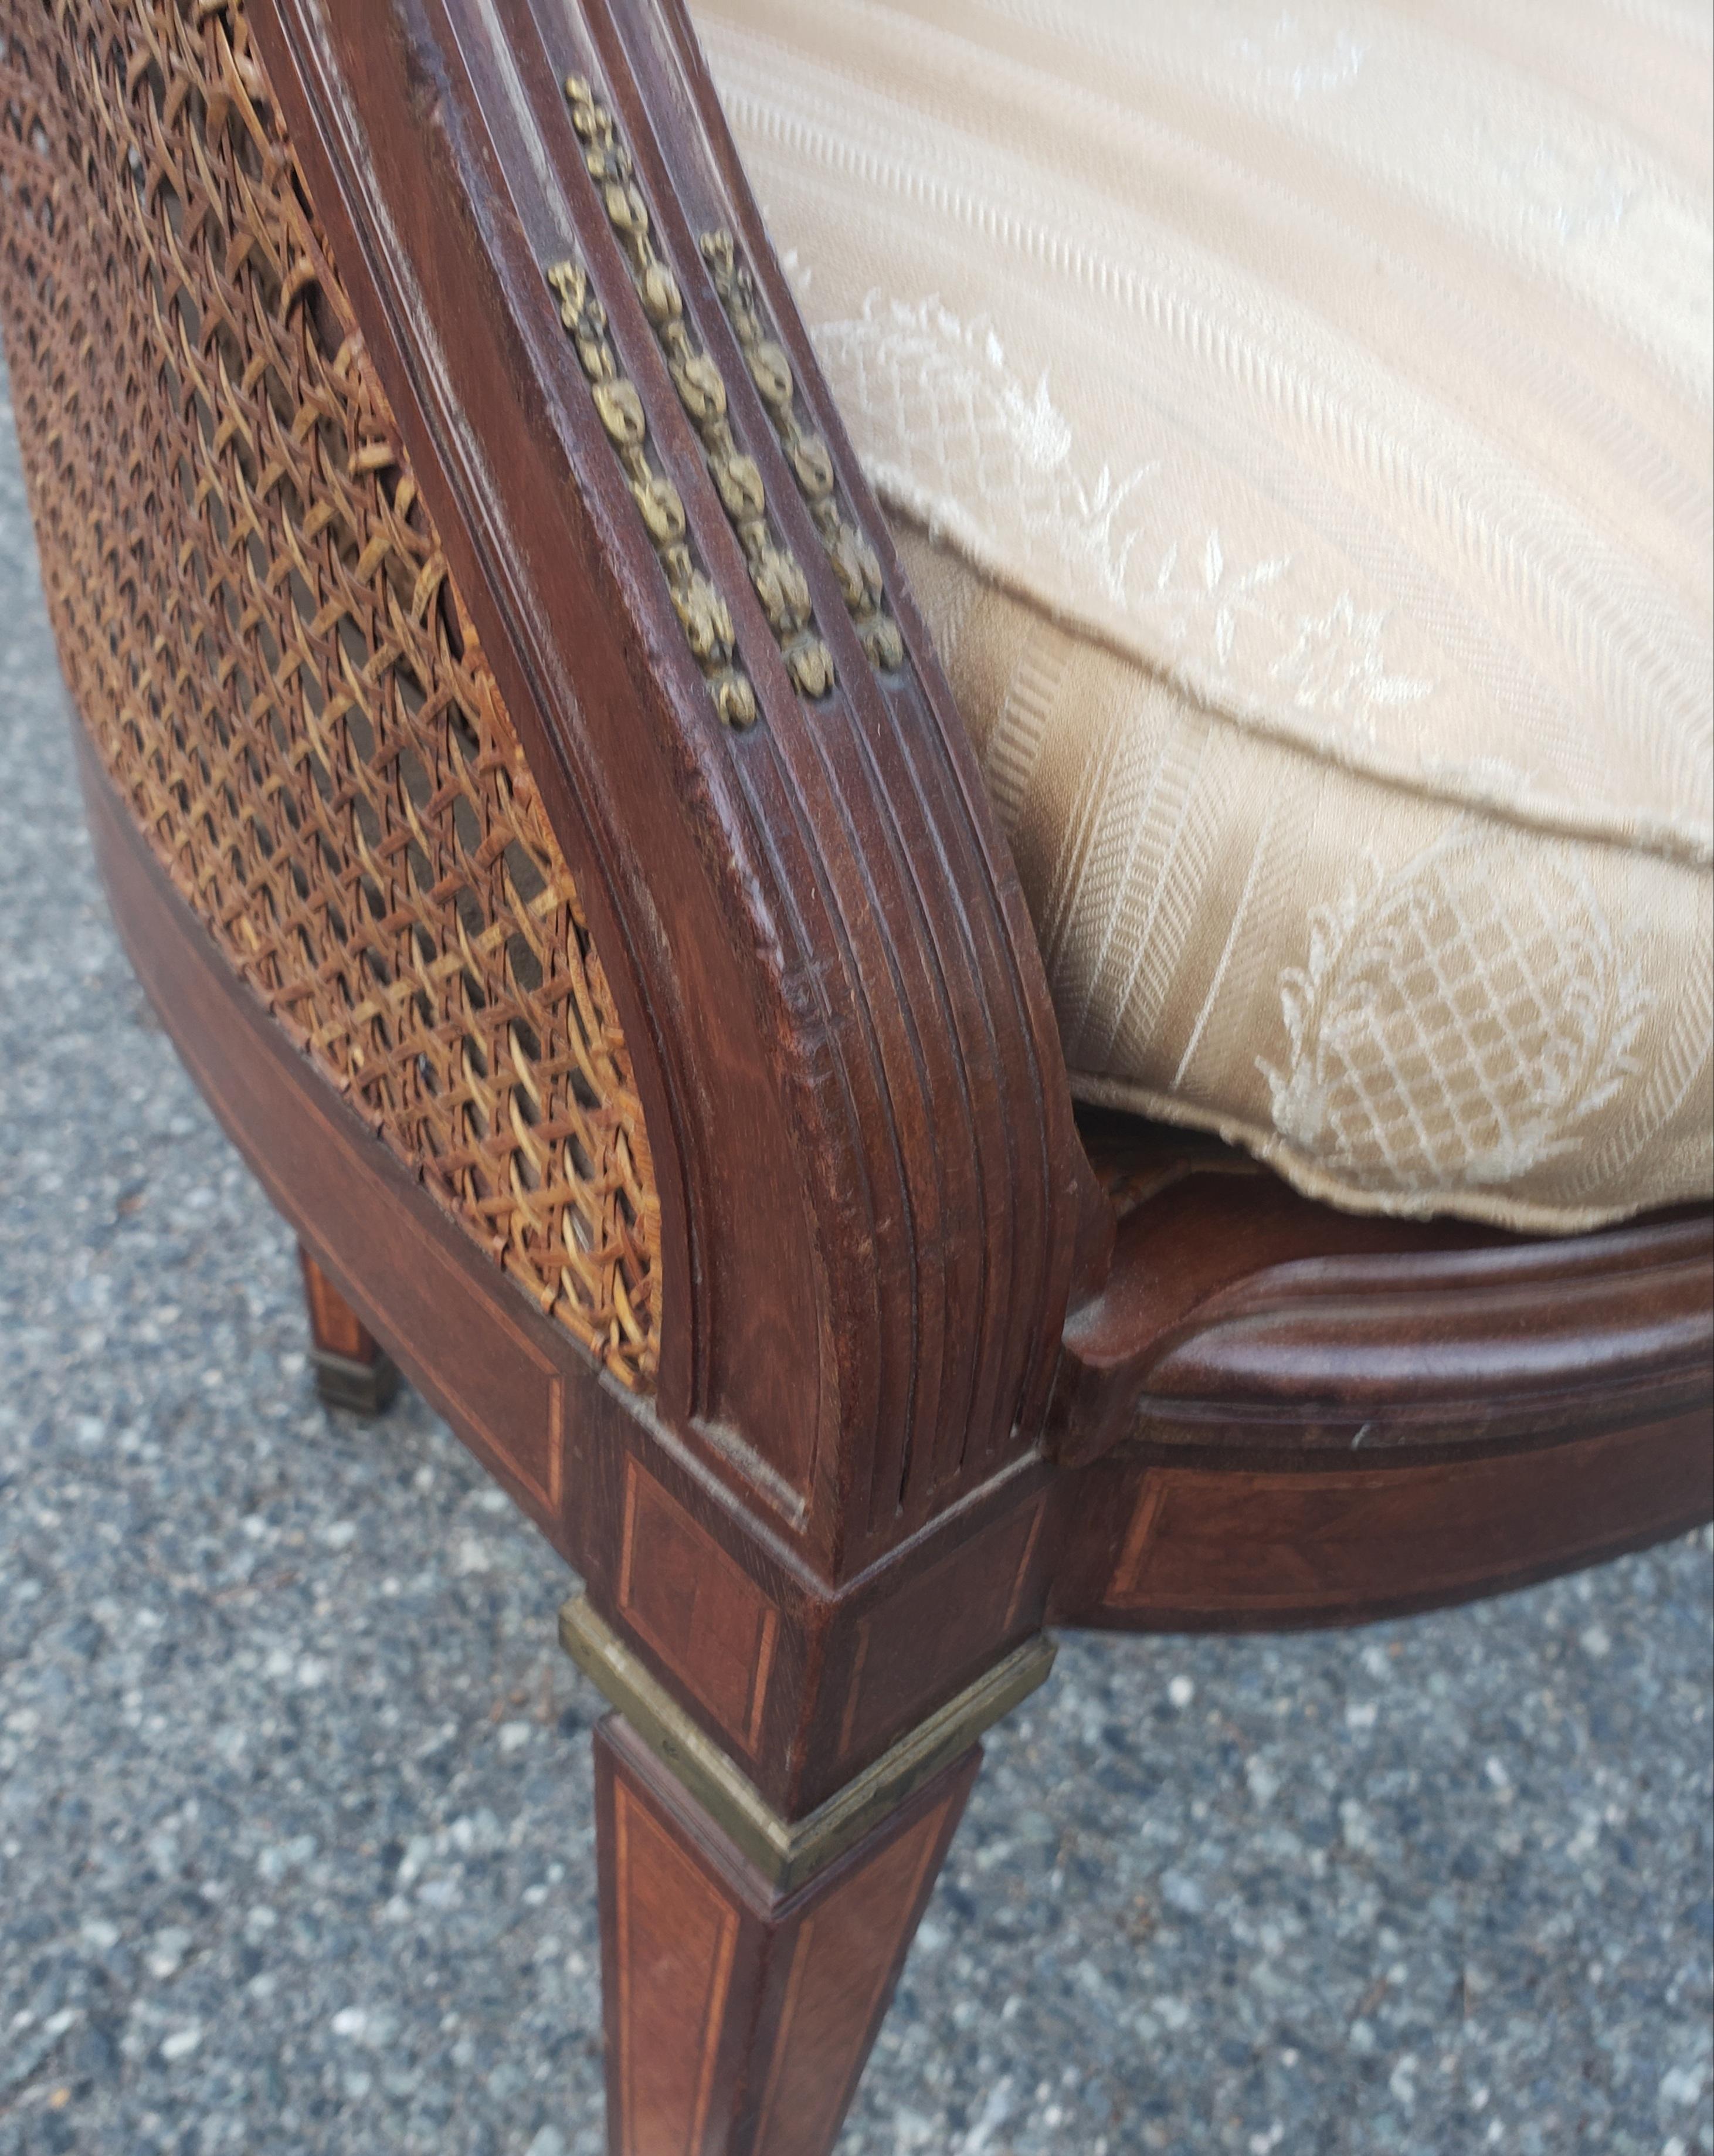 Louis XV Transitional Mahogany and Kingwood Marquetry Burl and Cane Barrel Chair For Sale 5